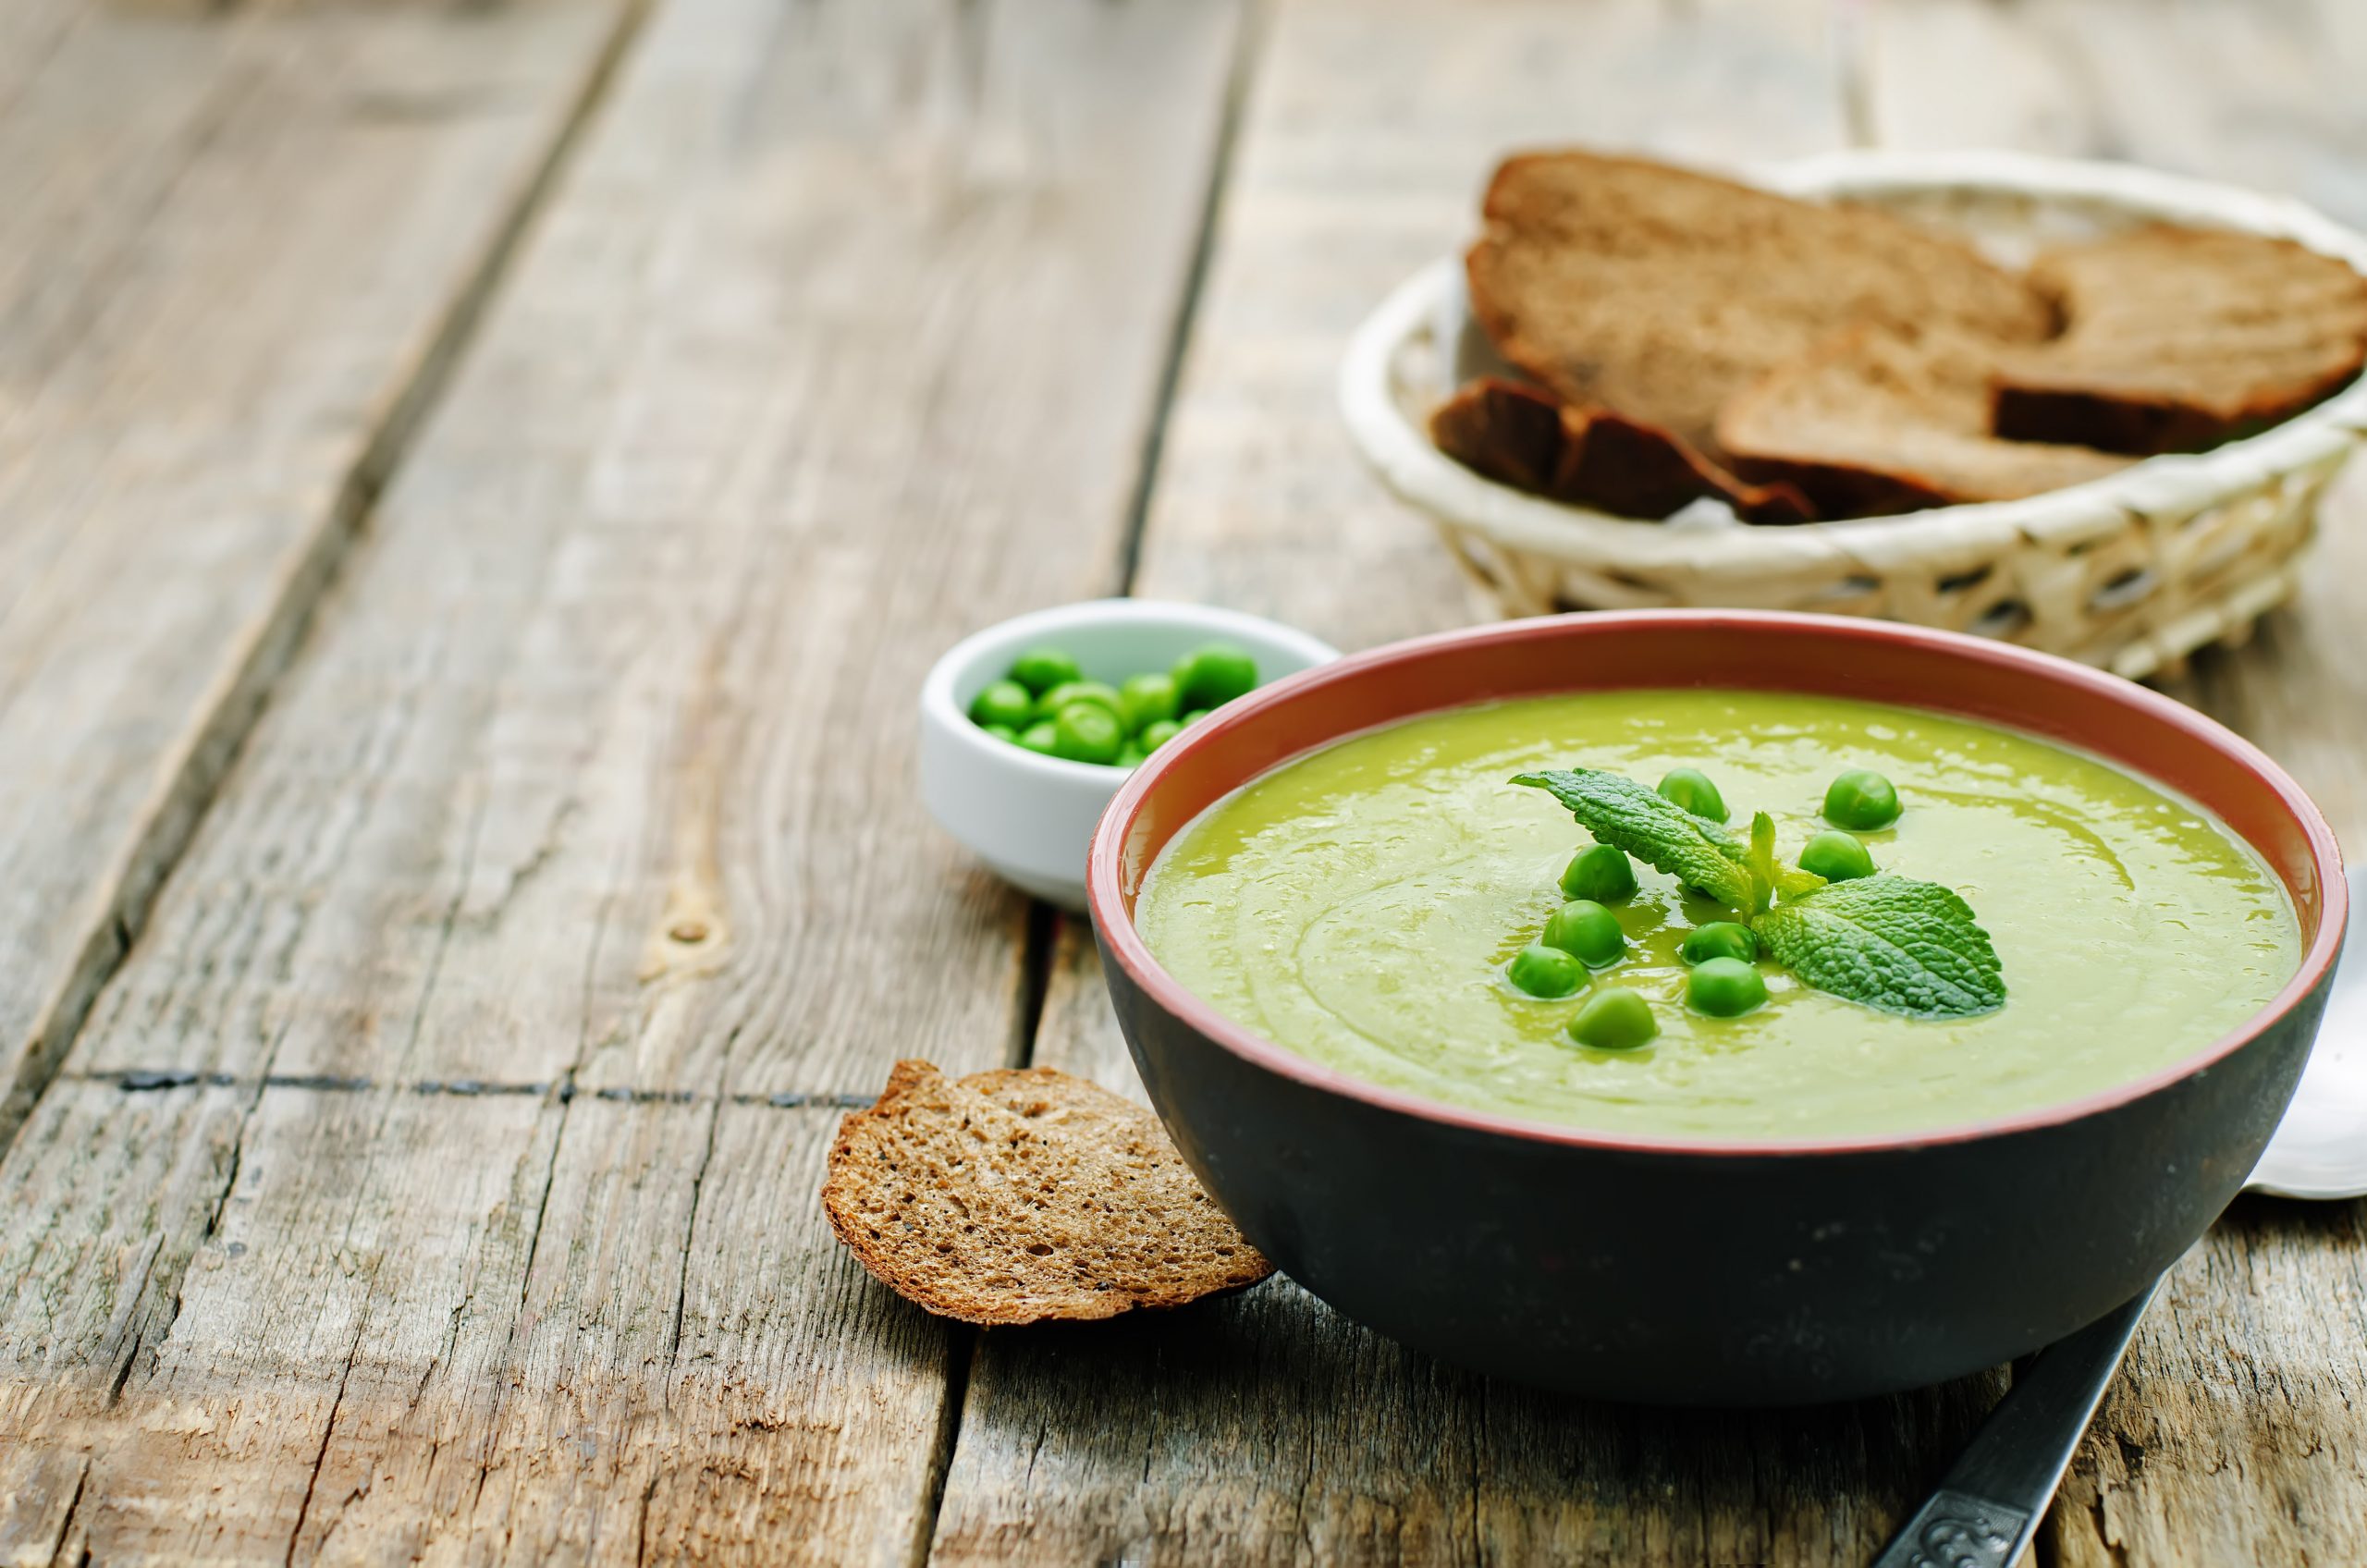 Whip Up This Pea Soup for National Soup Month